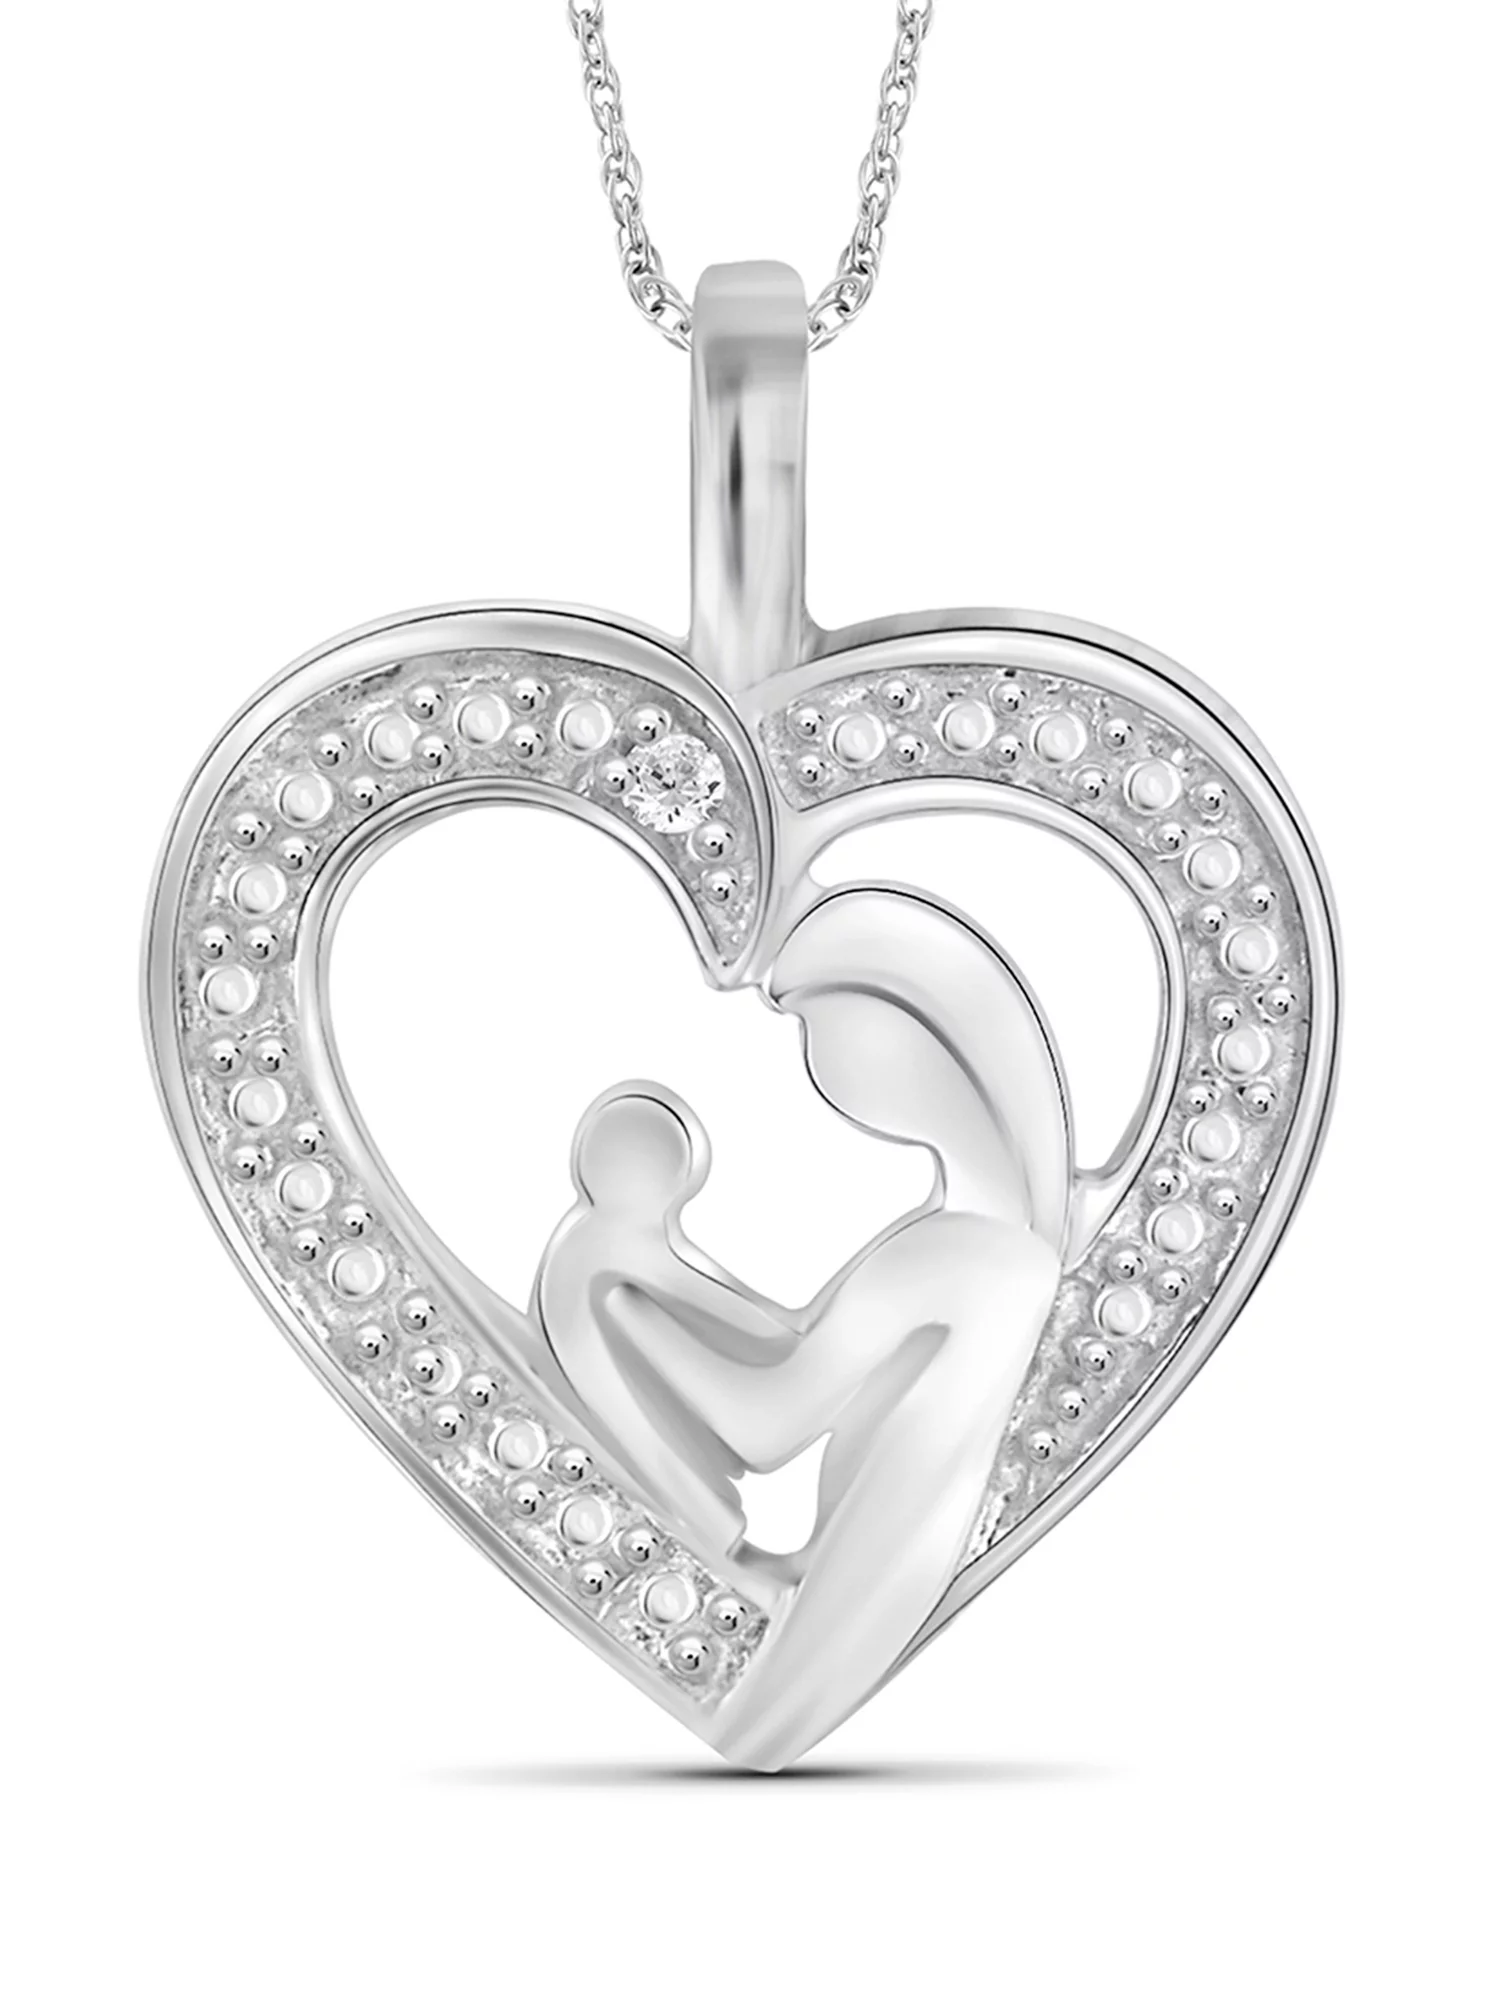 JewelersClub Heart Necklace with White Diamond Accent | Sterling Silver (.925) | Jewelry Pendant Necklaces for Women & 18 inch Rope Chain with Spring Clasp